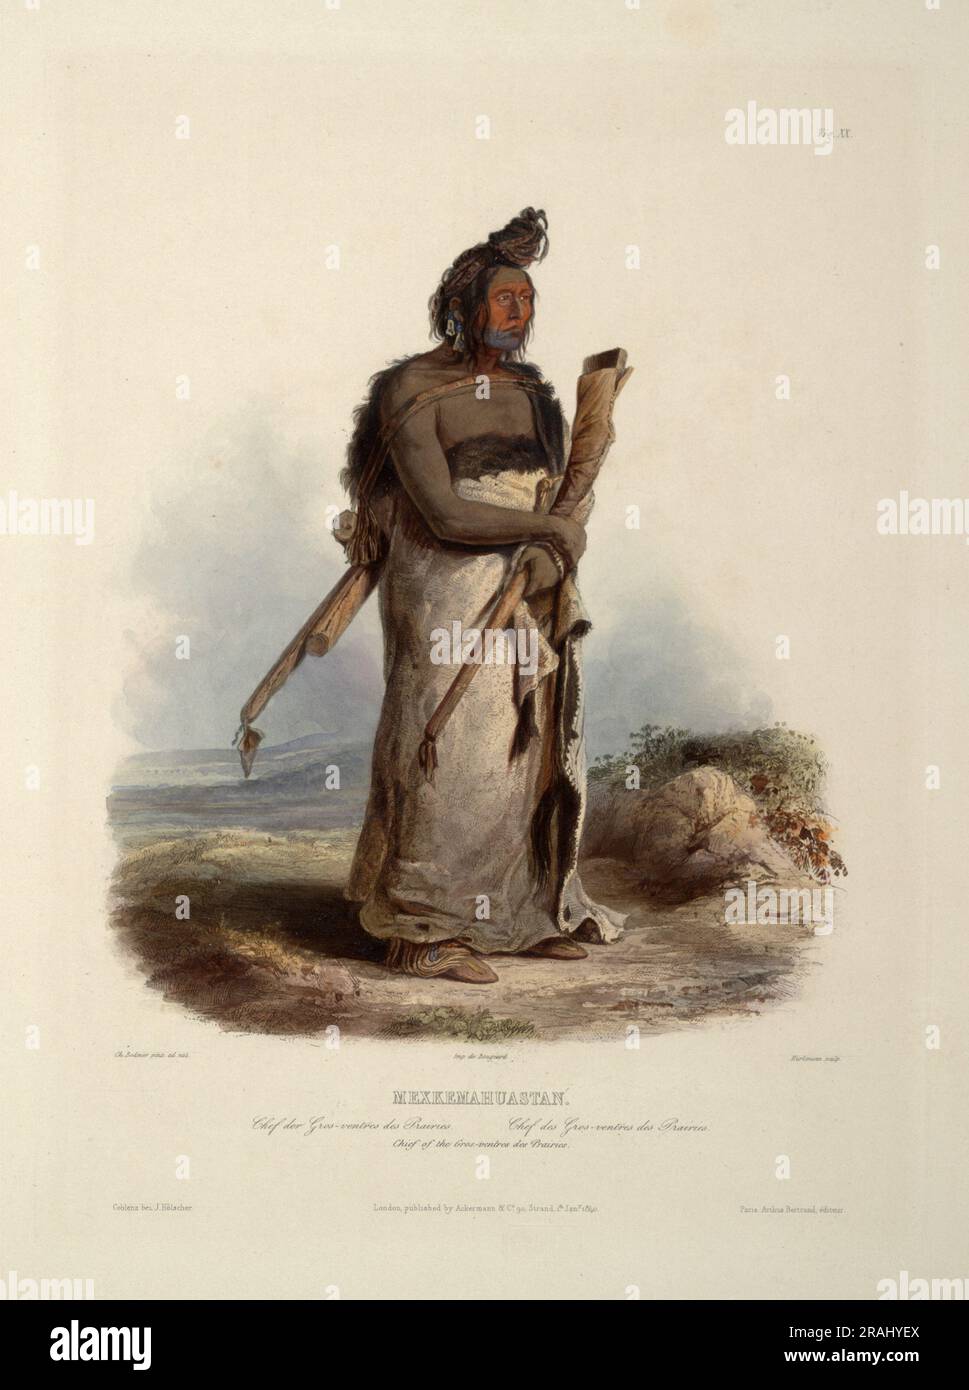 Mexkemahuastan, Chief of the Gros-Ventres of the Prairies, plate 20 from Volume 1 of 'Travels in the Interior of North America' 1843; United States by Karl Bodmer Stock Photo